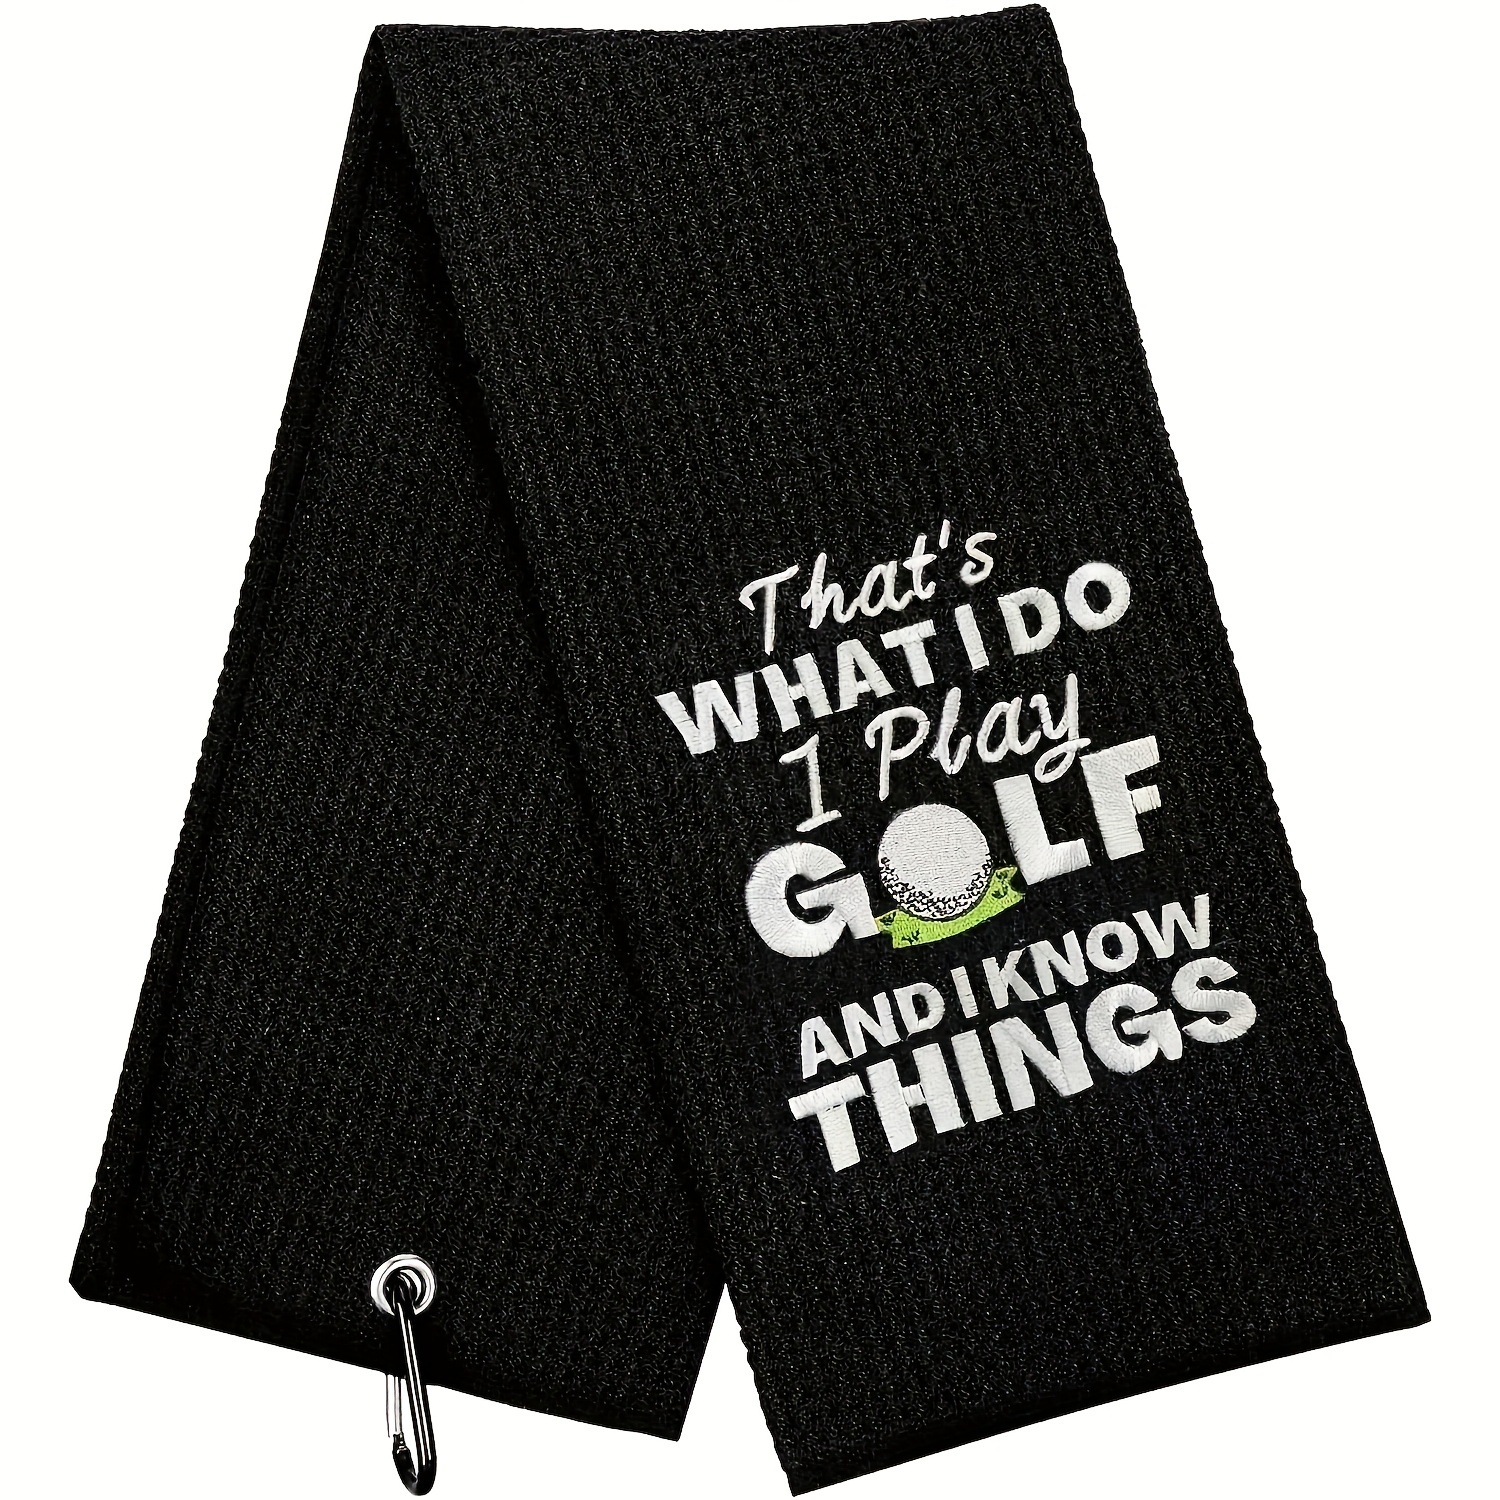 

1pc Premium Embroidered Golf Towel With Clip - Perfect Golf Gift For Men And Women - Stay Clean And Dry On The Course - Black